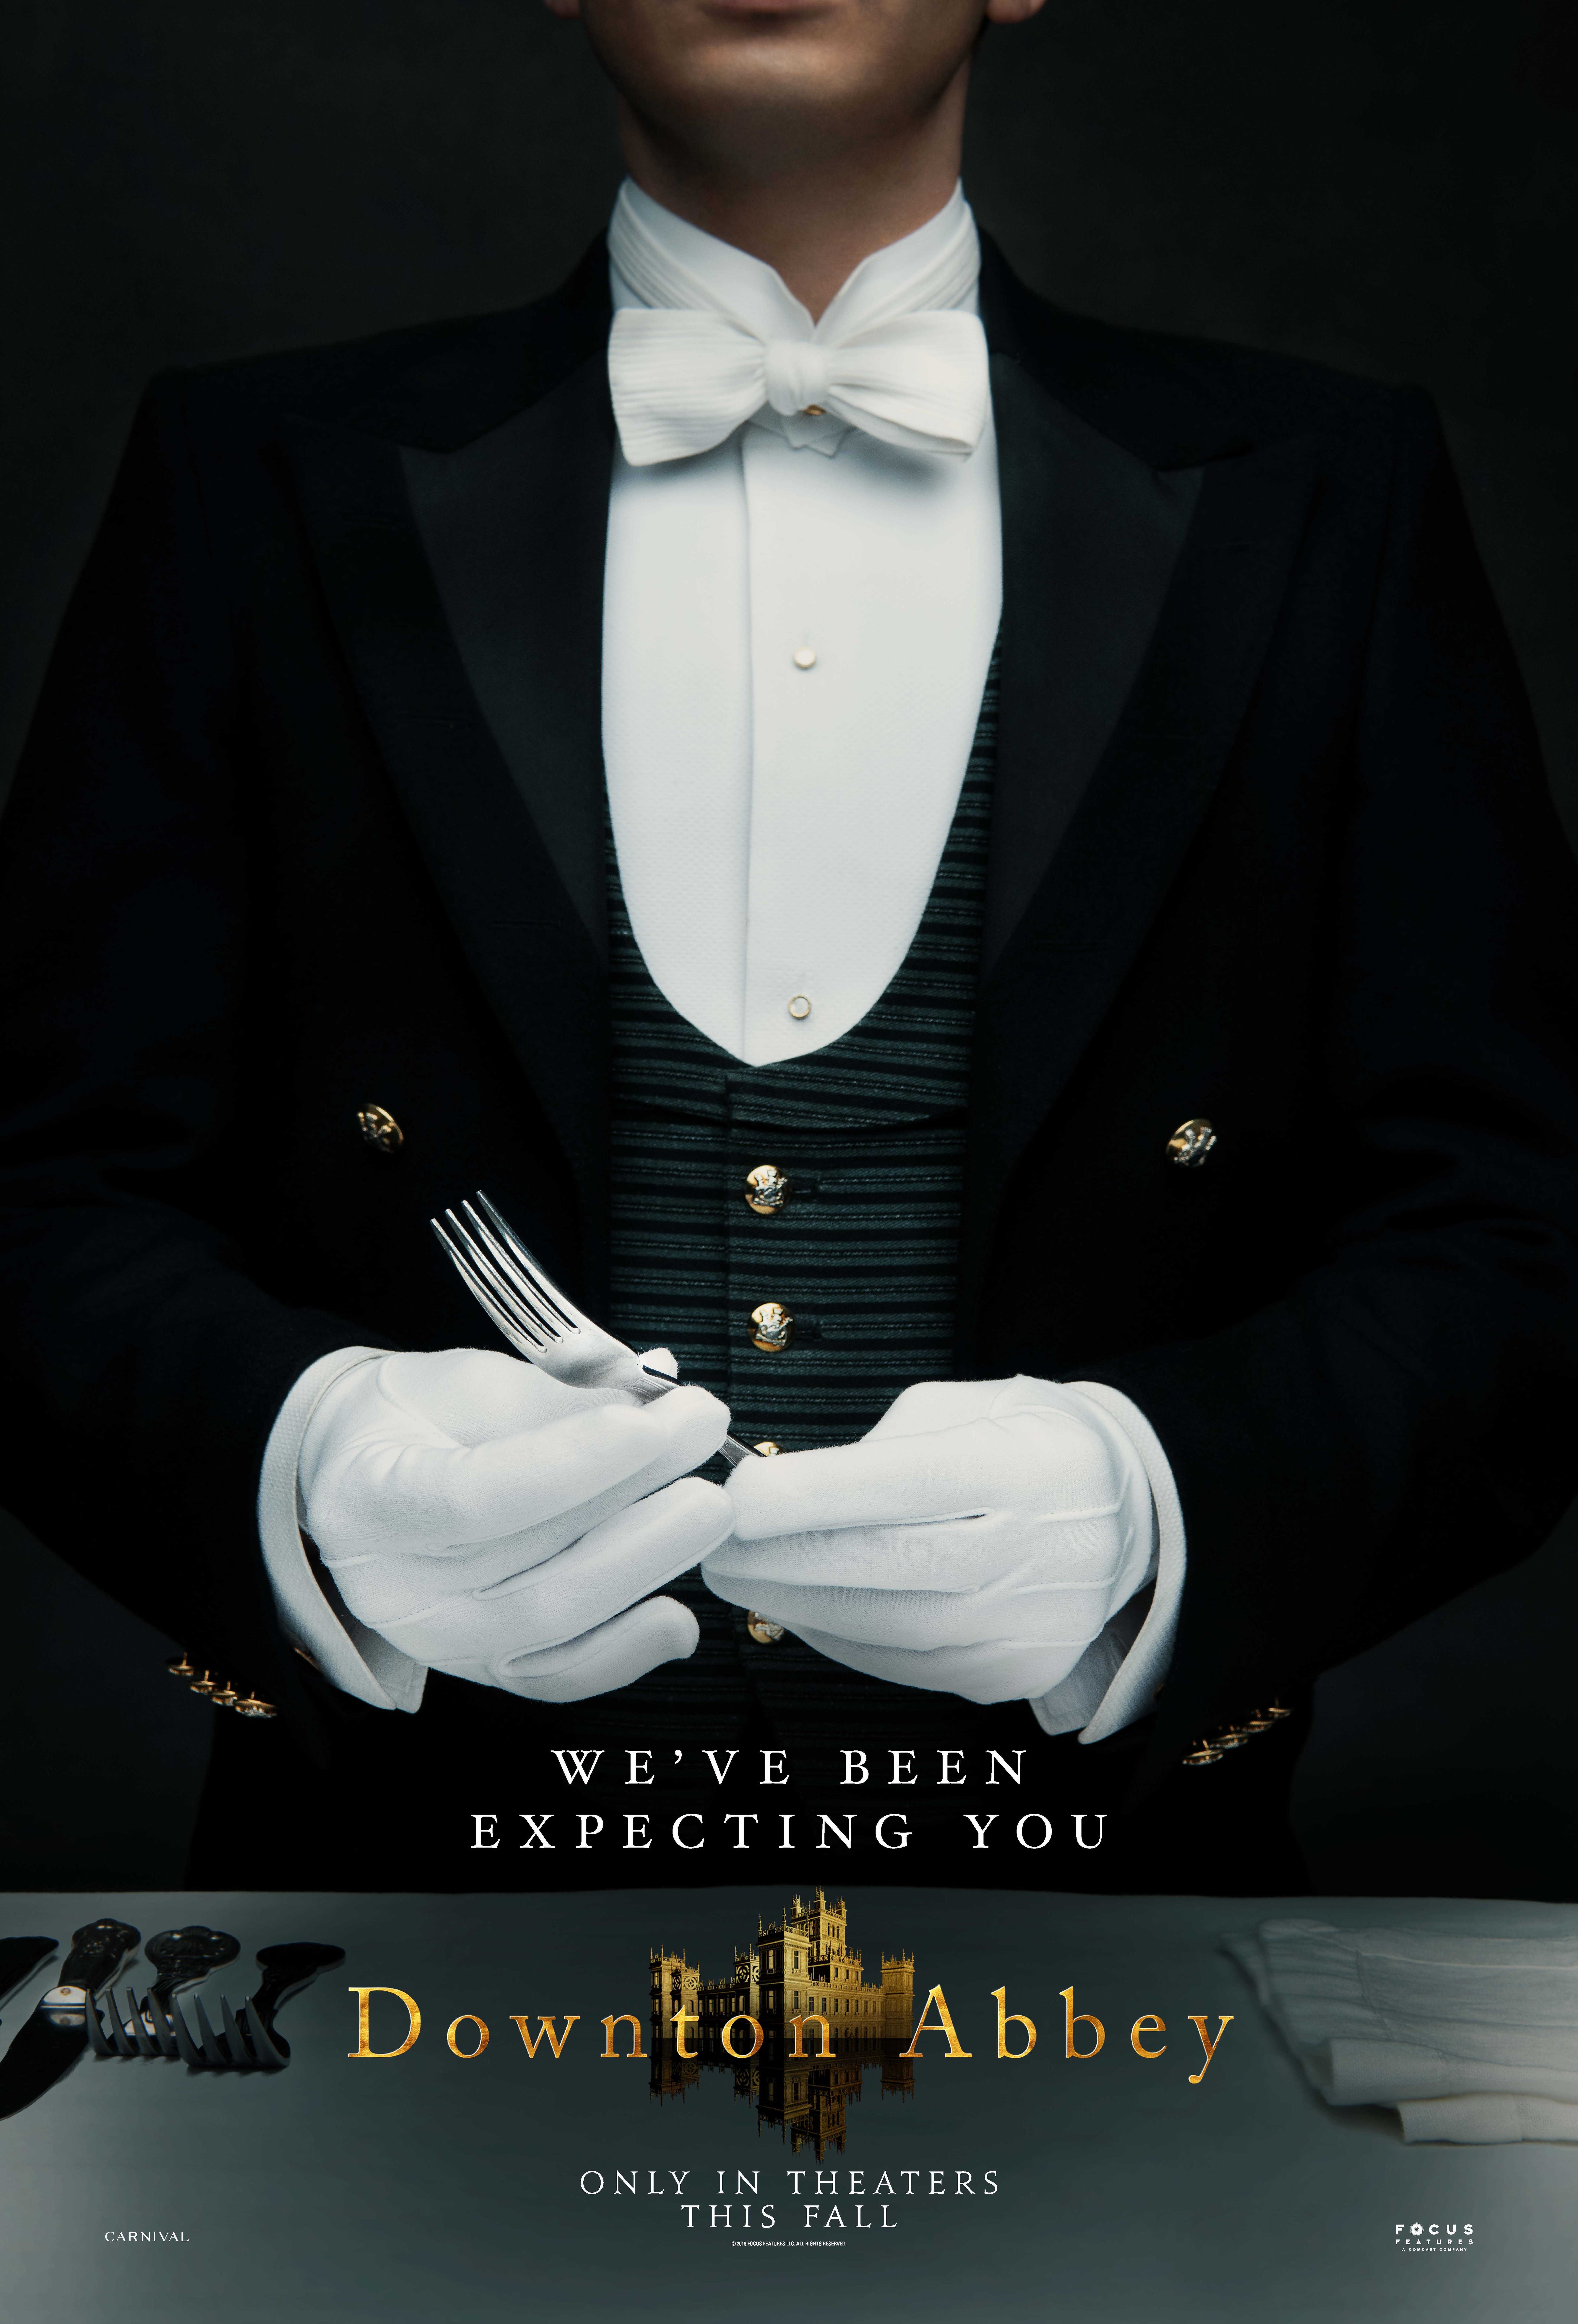 The Downton Abbey People Have Released Many New Posters